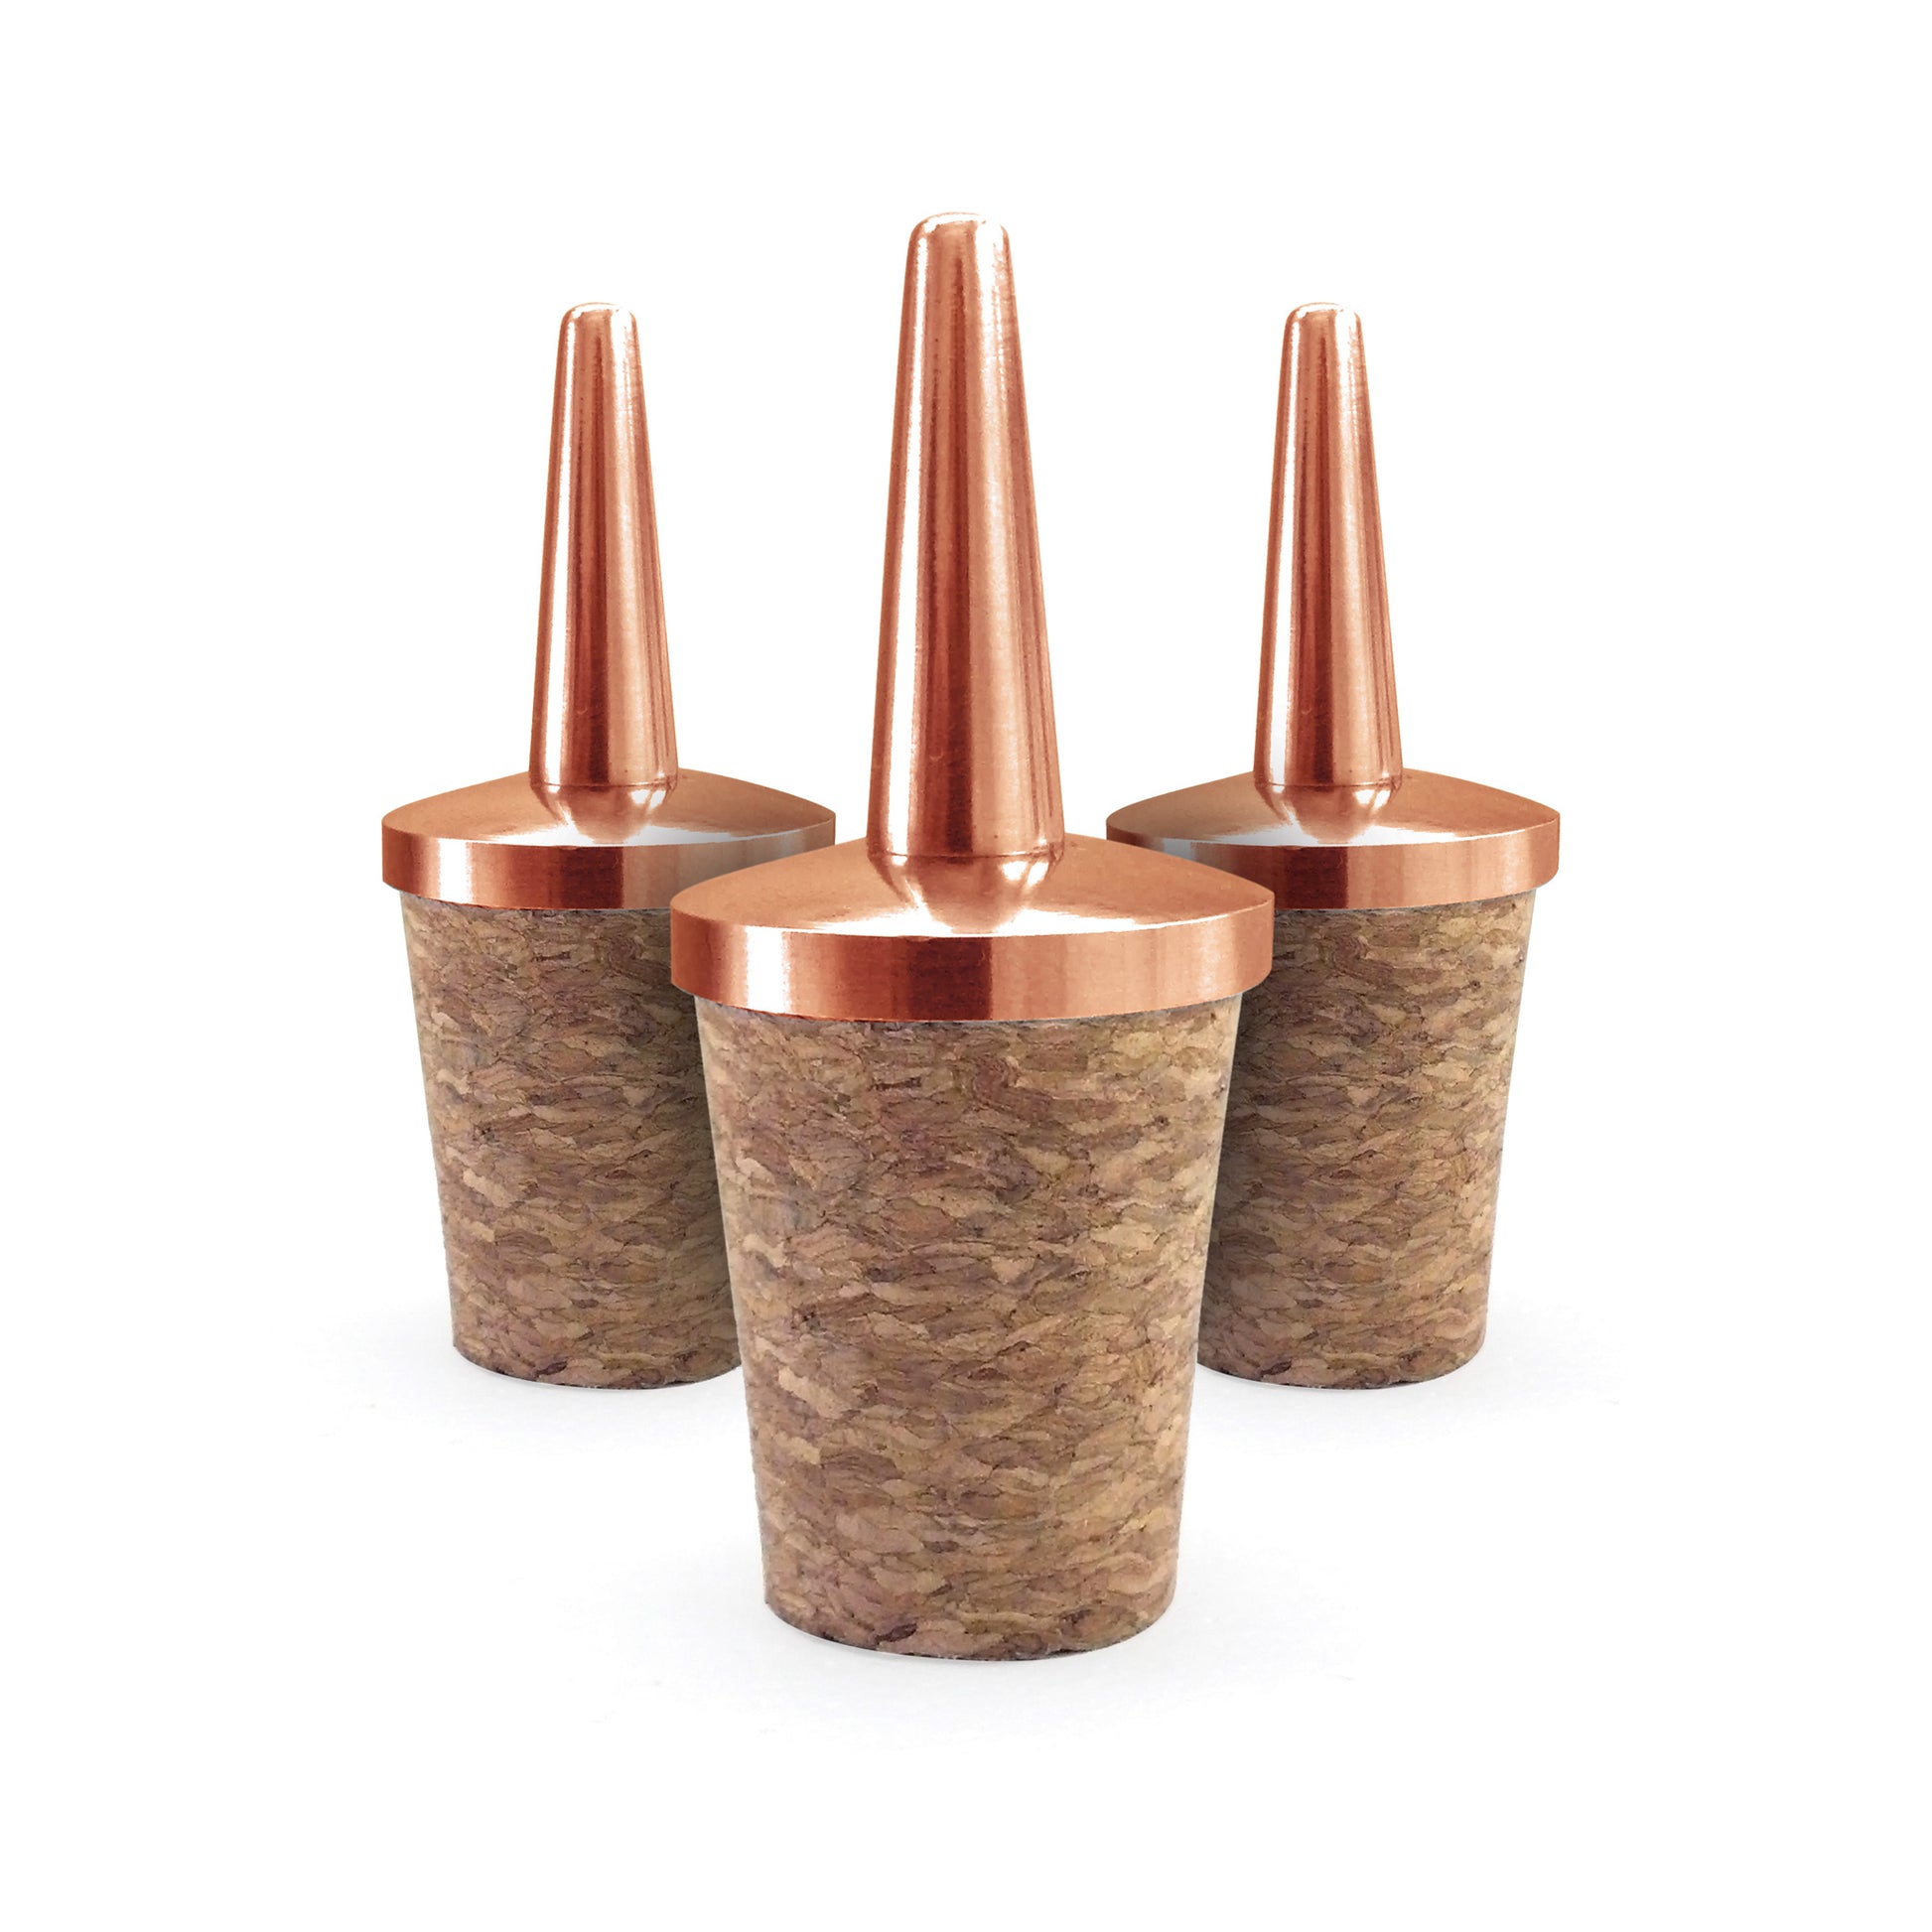 DASHER TOP – COPPER-PLATED / PACK OF 3